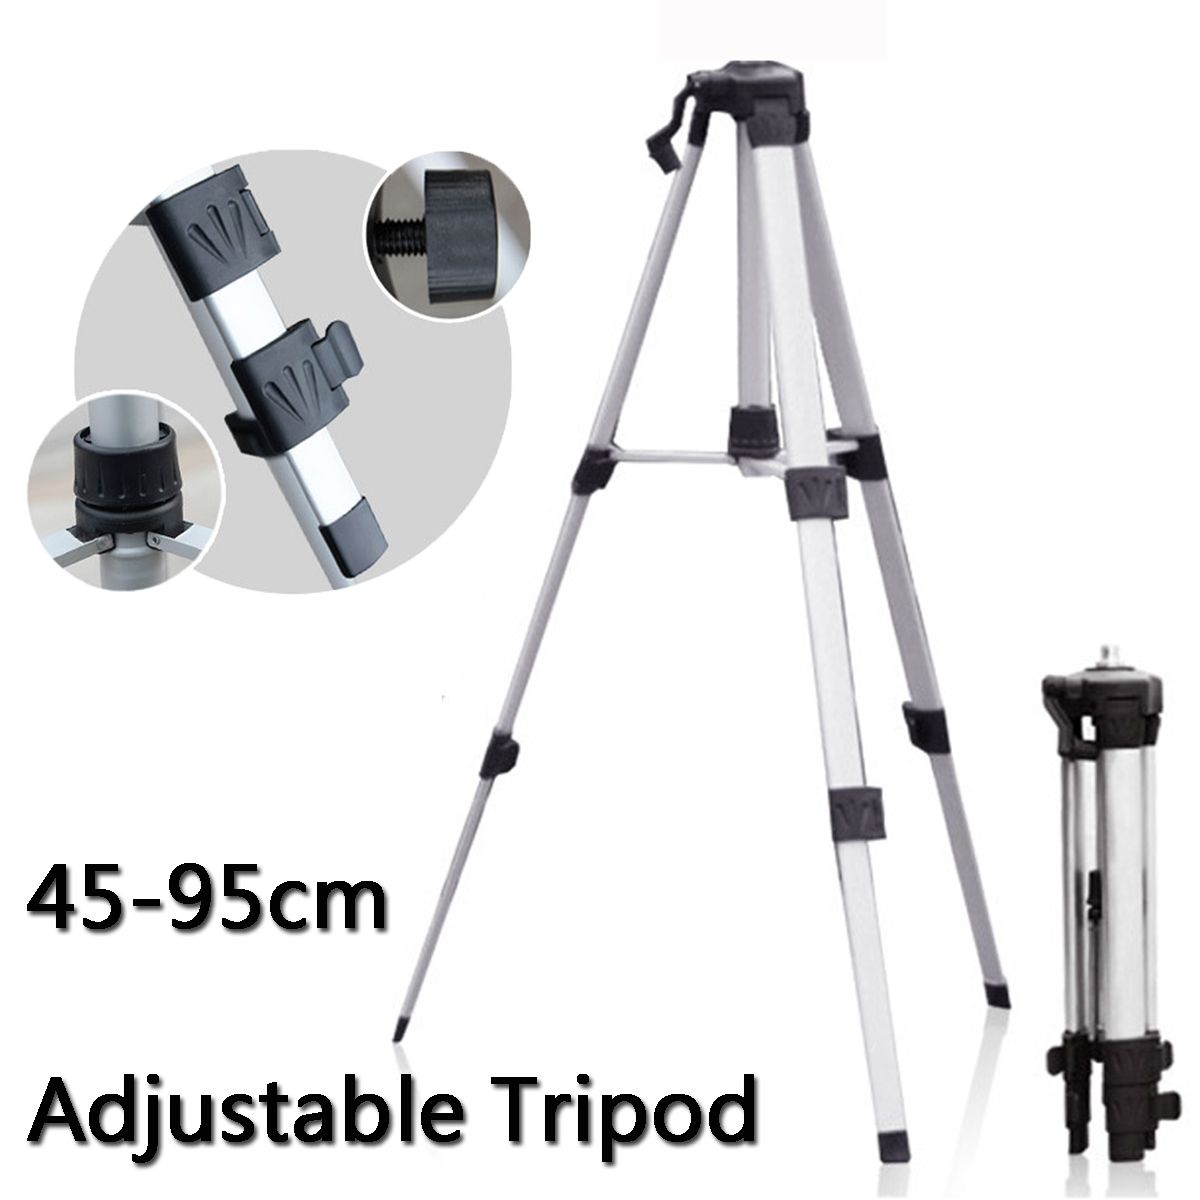 Adjustable-Tripod-Stand-Extension-45-95cm-For-Rotary-Laser-Level-Leveling-Tool-1168505